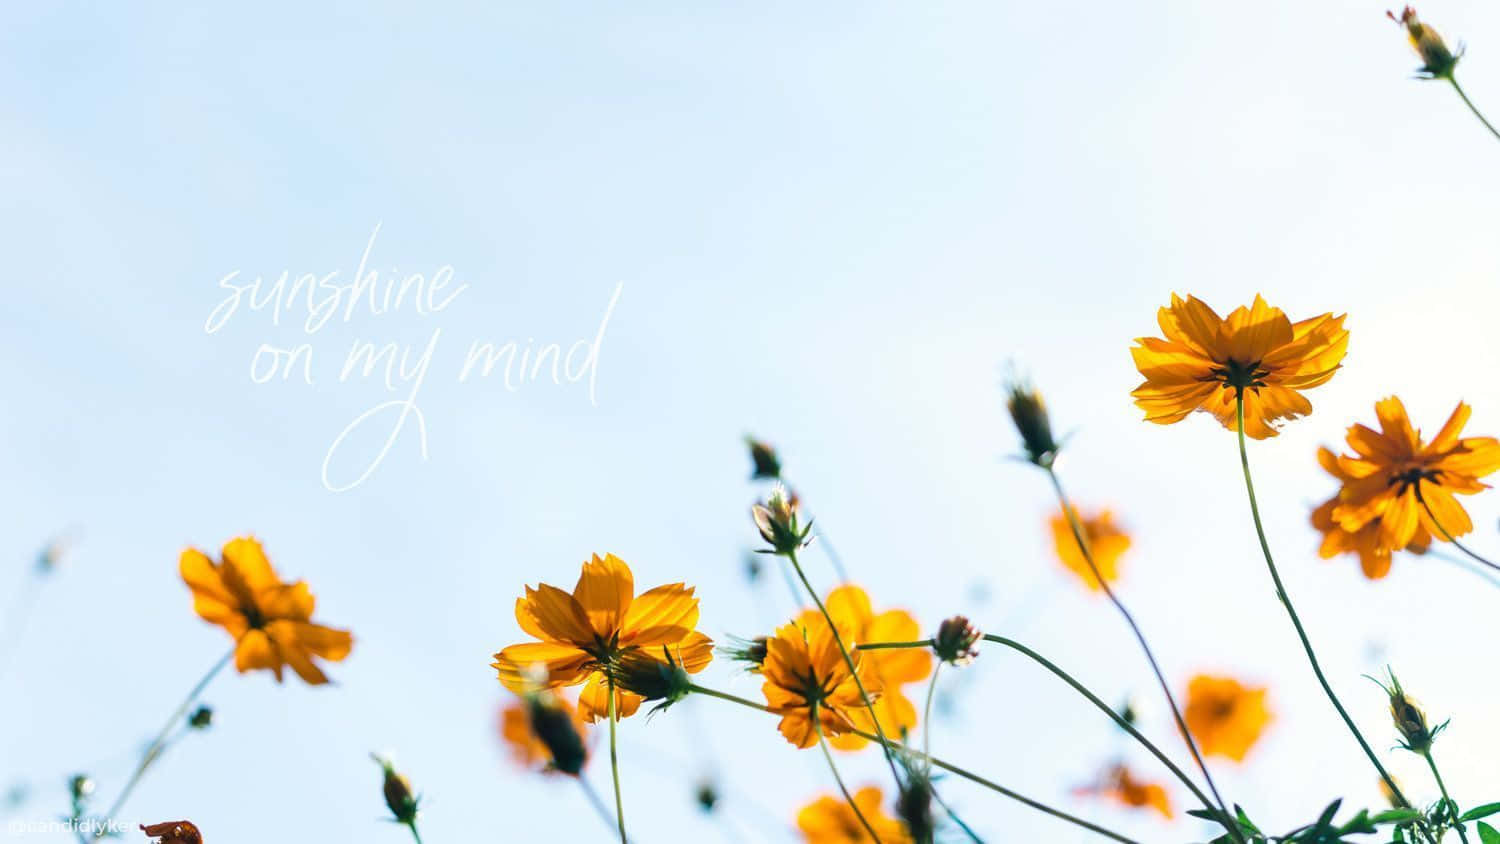 A Colorful and Bright Spring Aesthetic Desktop Wallpaper